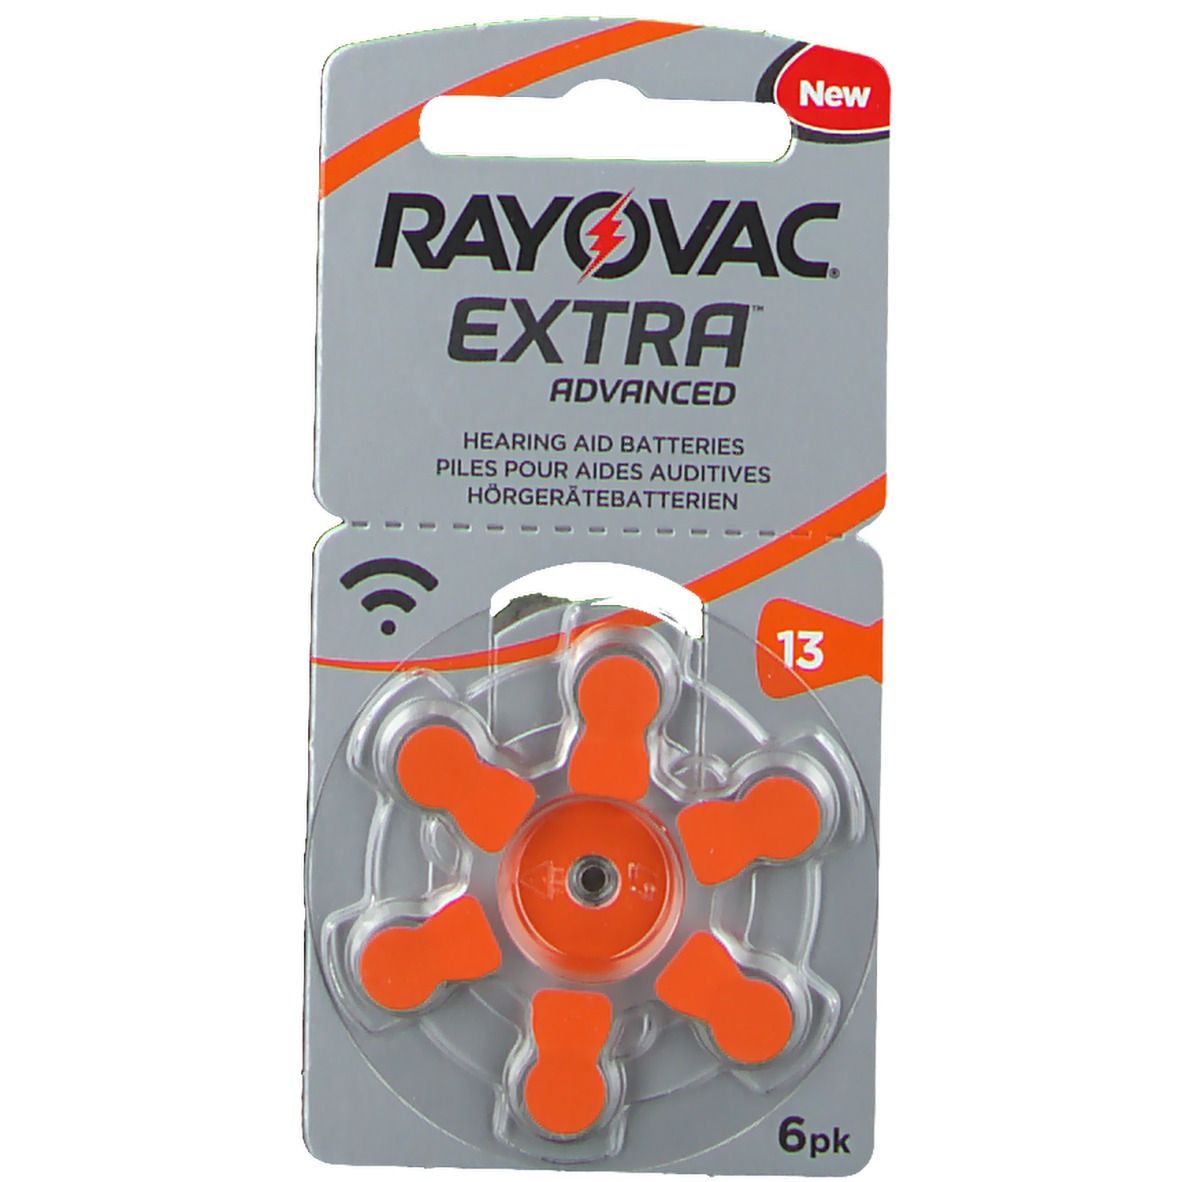 Rayovac Extra Advanced Piles Taille 13